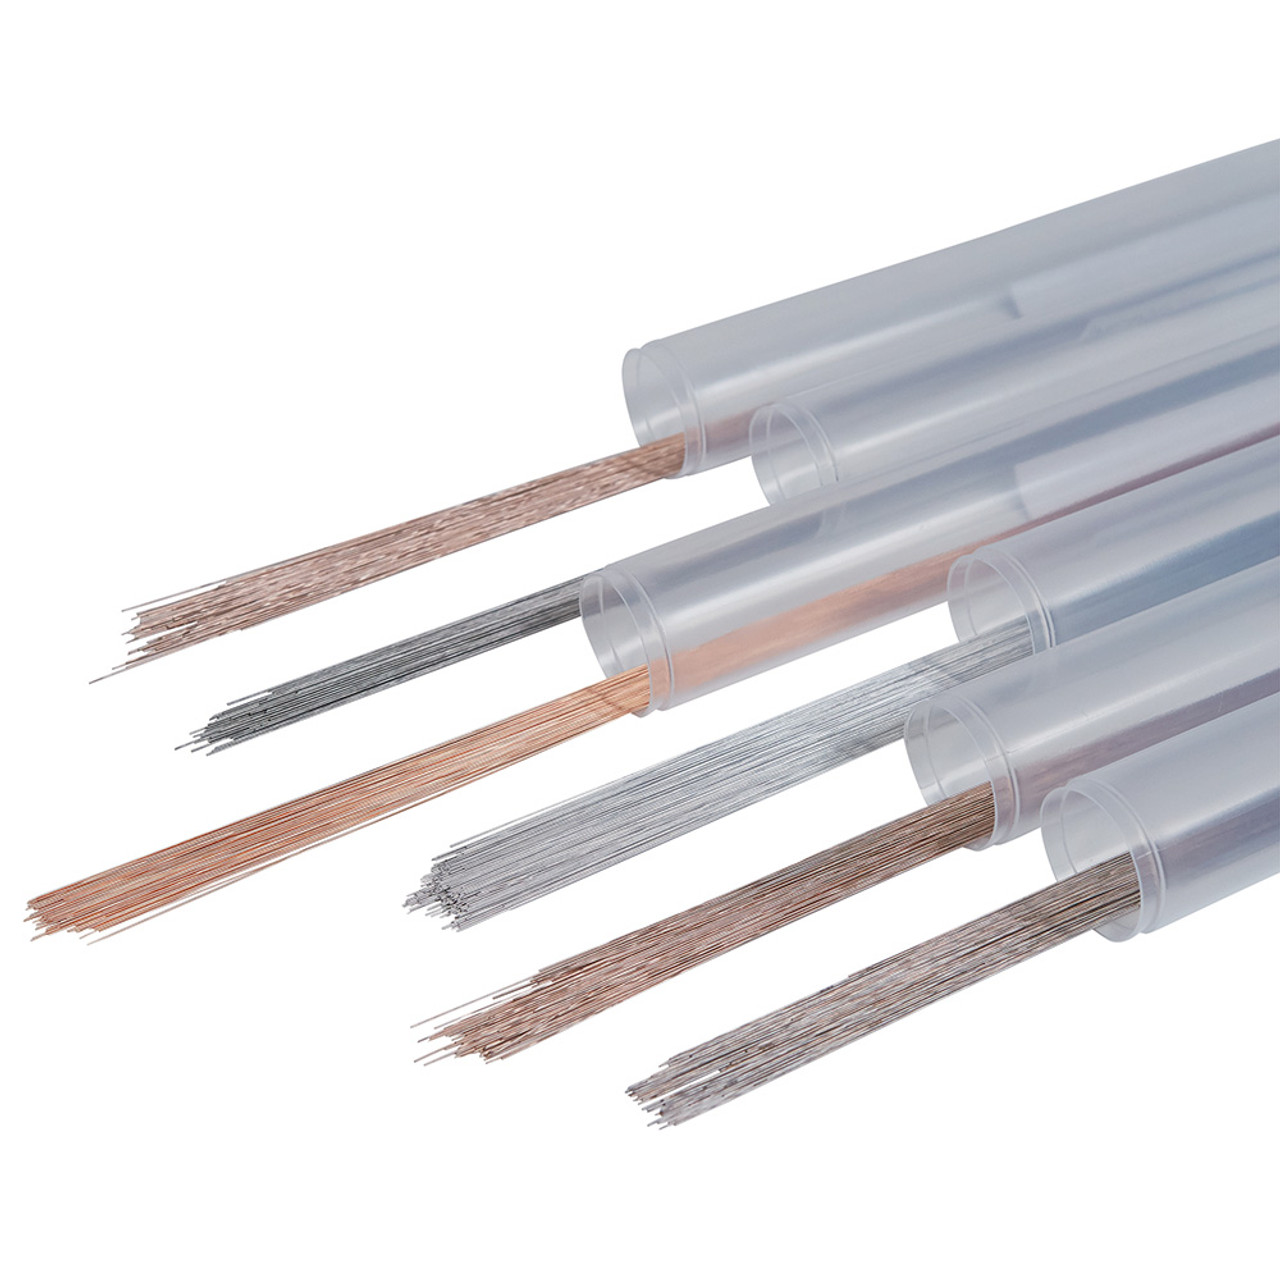 Laser Welding Wires - SS-308, 0.3mm pkg. of 25 grams = approx. 141 wires